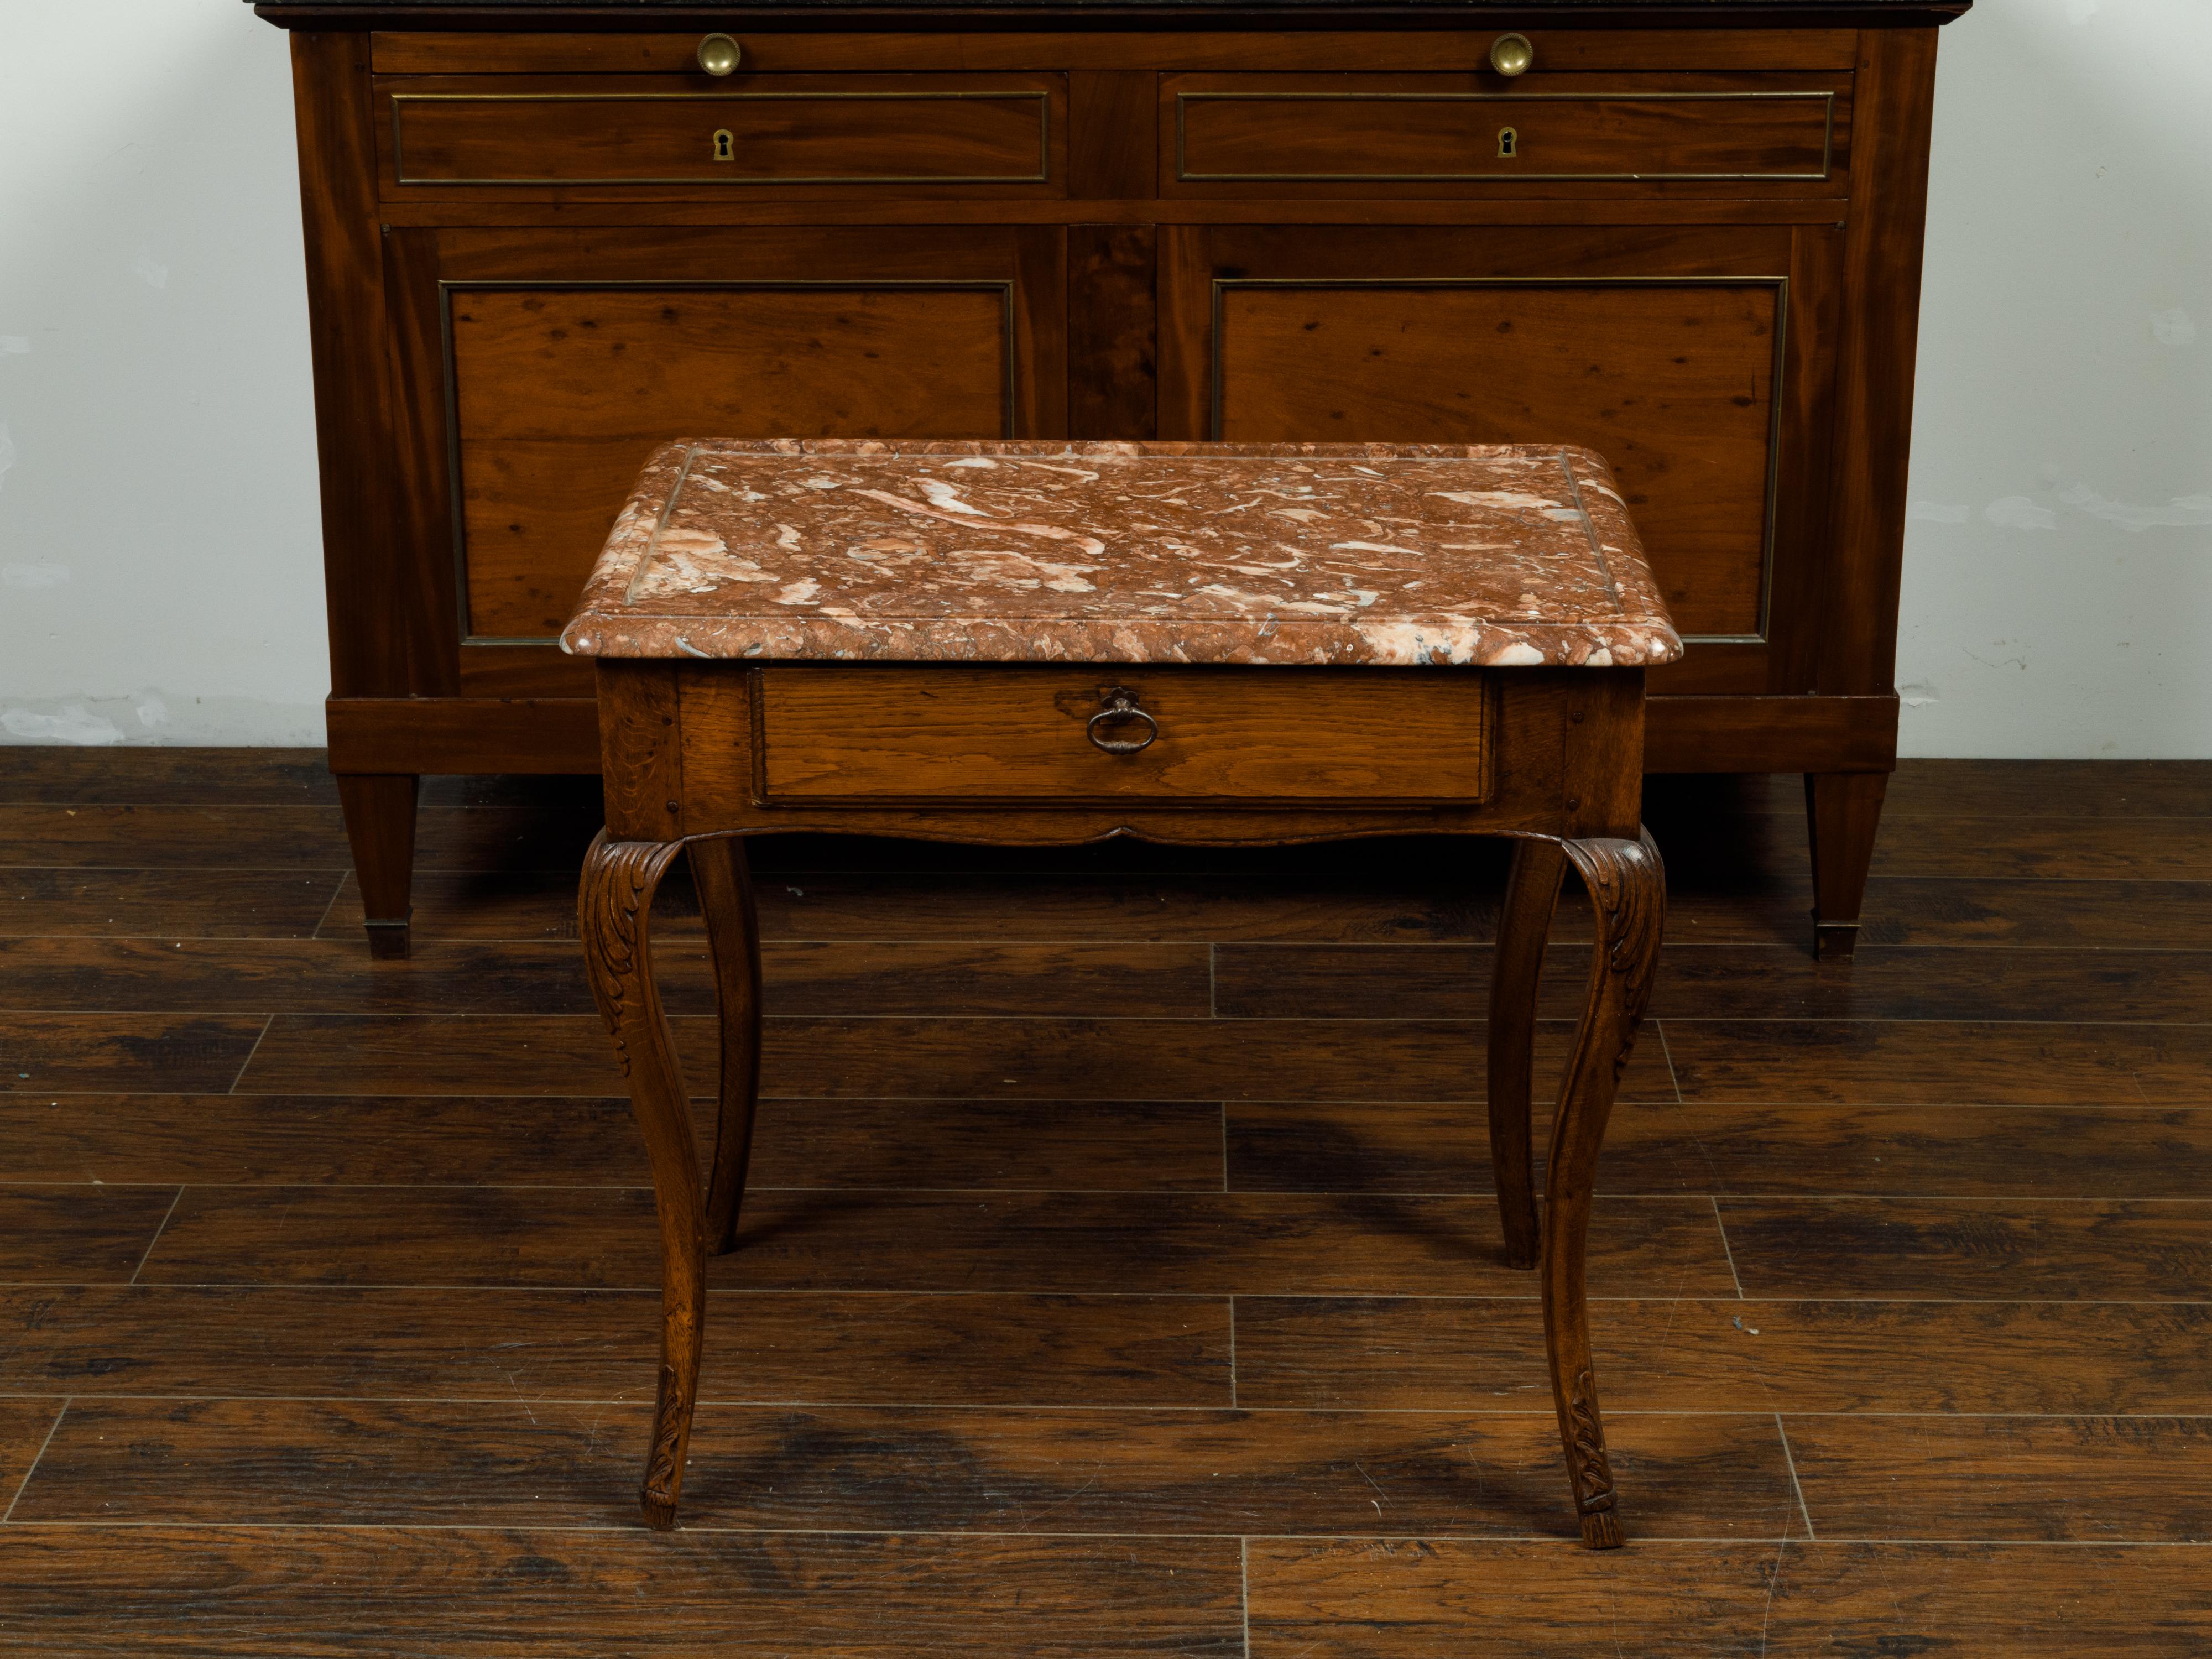 A French Louis XV style walnut side table from the 19th century, with red marble top, single drawer and cabriole legs. Created in France during the 19th century, this walnut side table features a rectangular variegated red marble top recessed in the